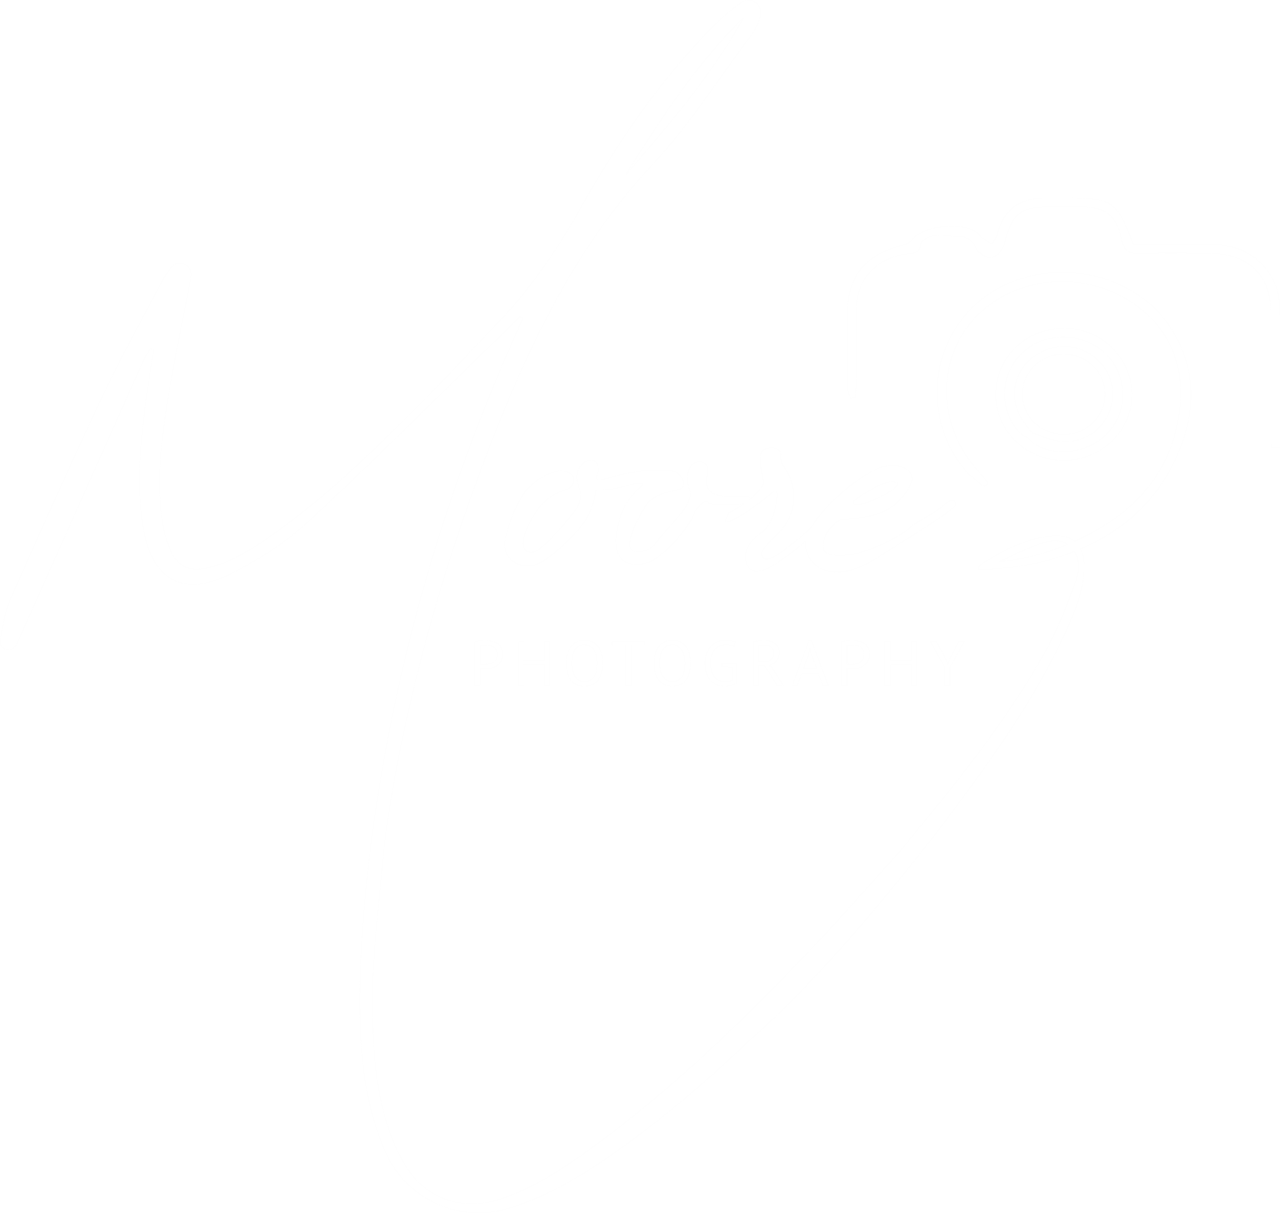 MOORE PHOTOGRAPHY